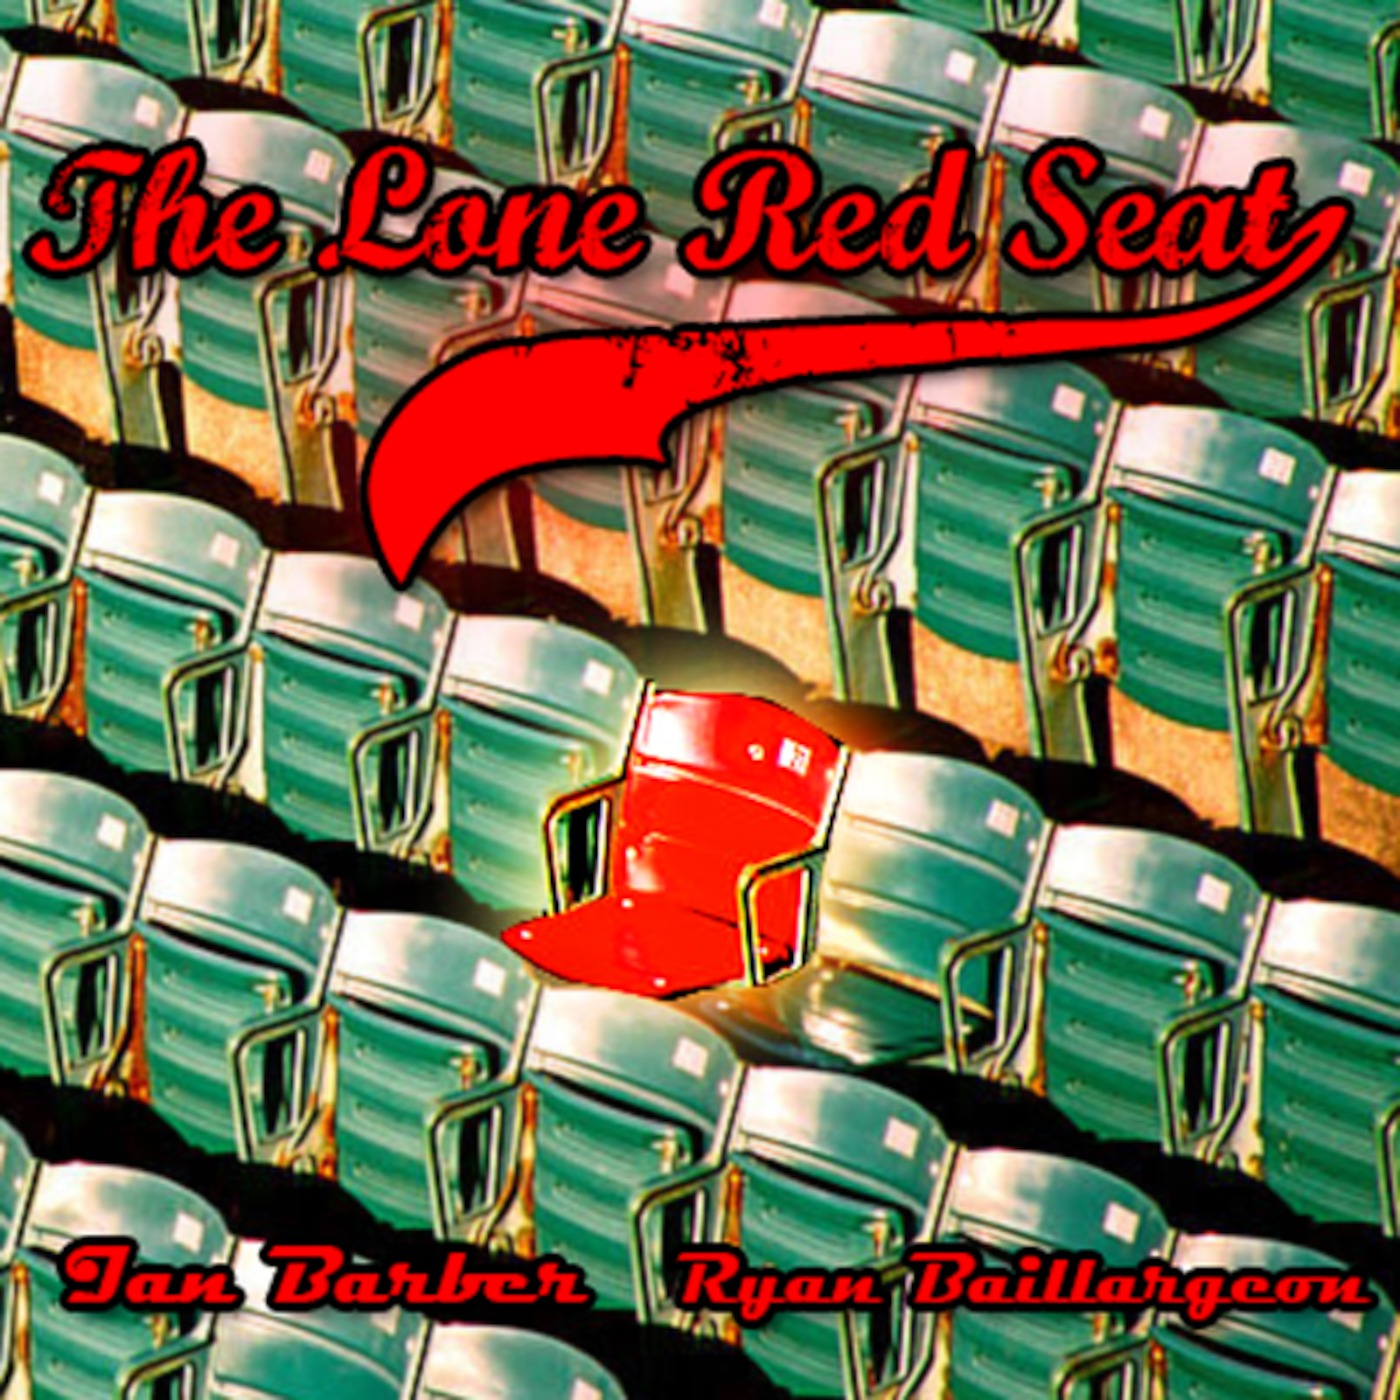 The Lone Red Seat - Boston Red Sox Podcast - Episode 2 - 4/4/14